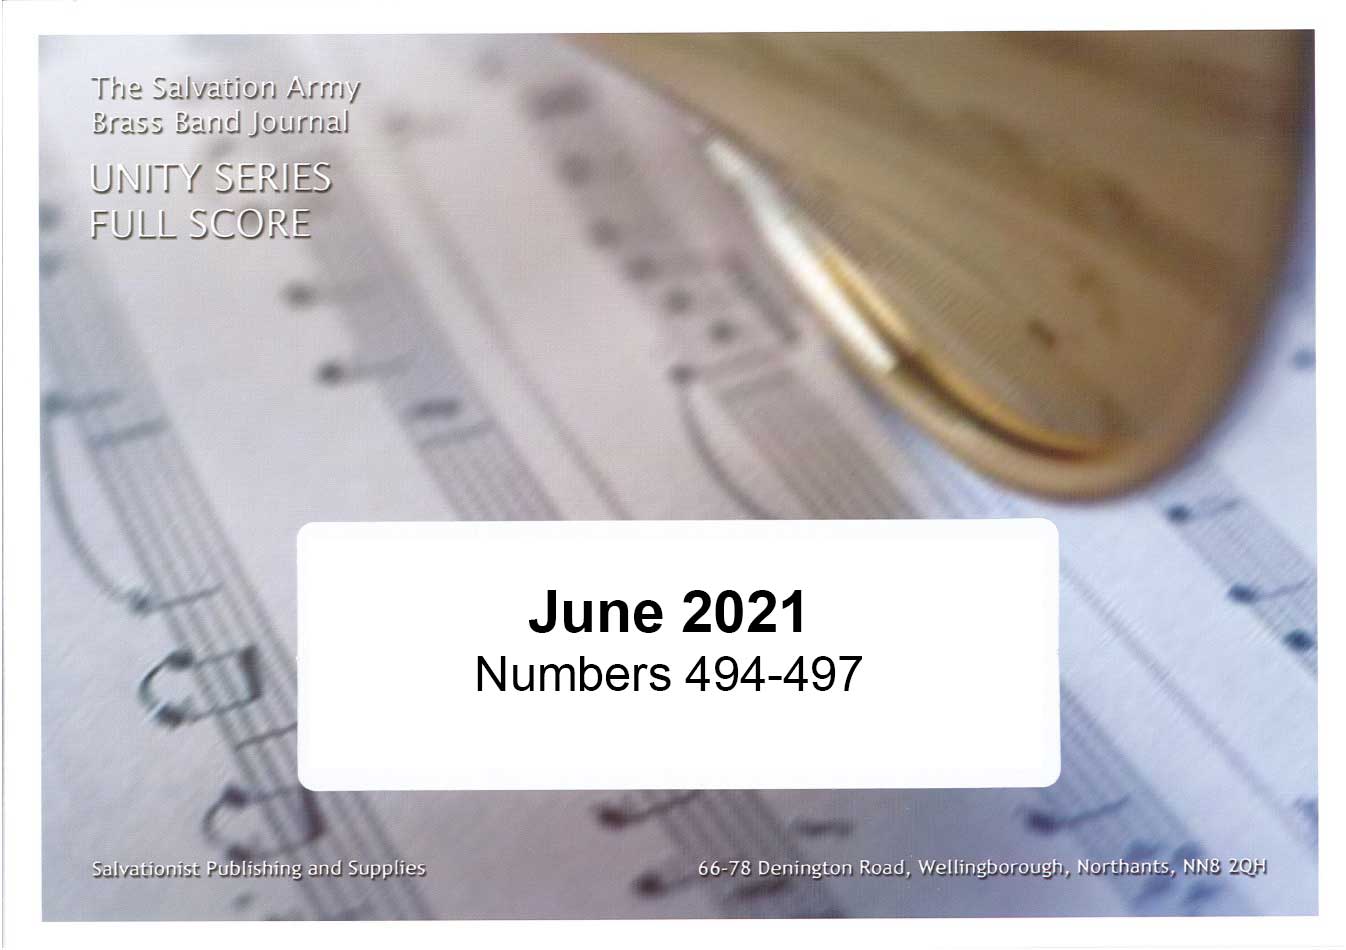 Unity Series Band Journal - Numbers 494 - 497, June 2021